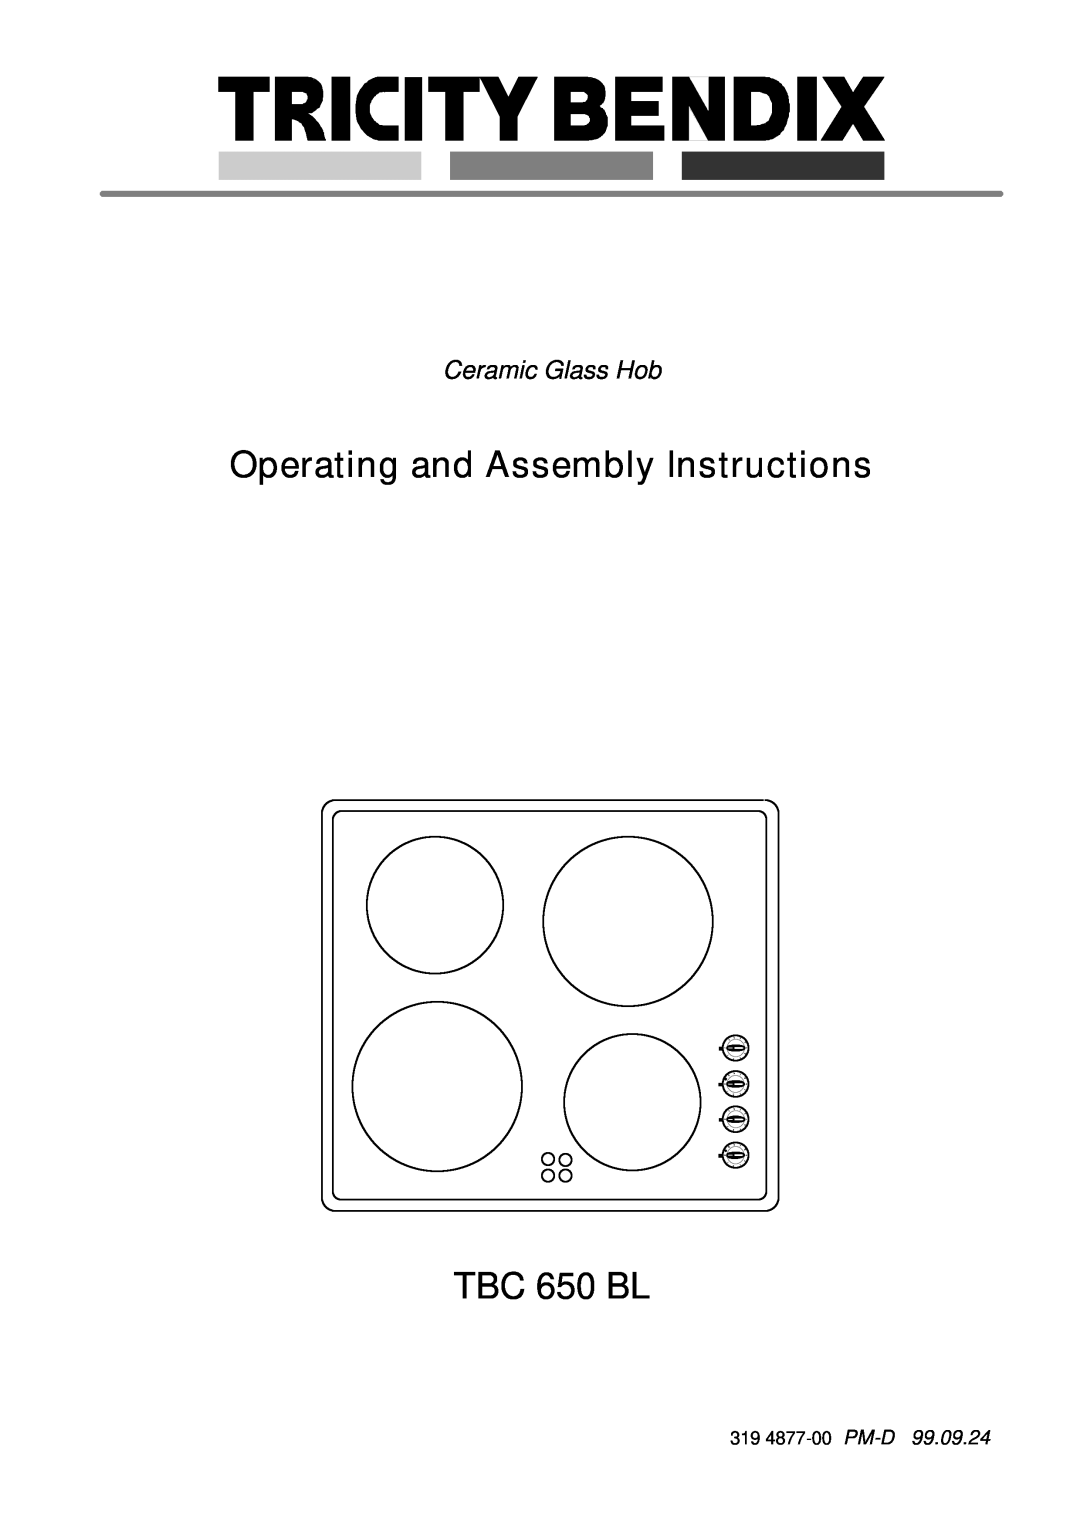 Tricity Bendix TBC 650 BL manual Operating and Assembly Instructions, Ceramic Glass Hob, 319 4877-00 PM-D 